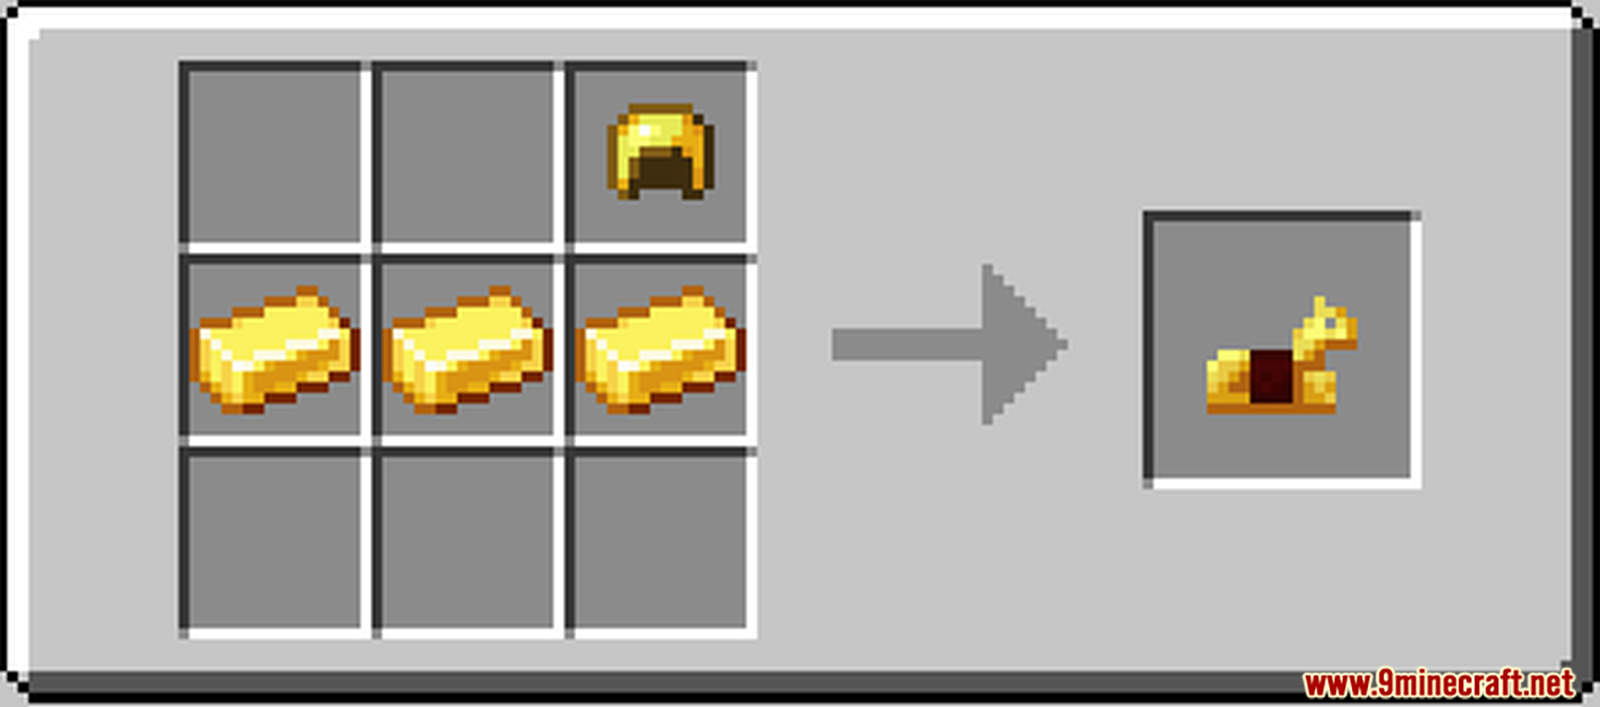 Horse Armor Crafting Data Pack Recipes (3)